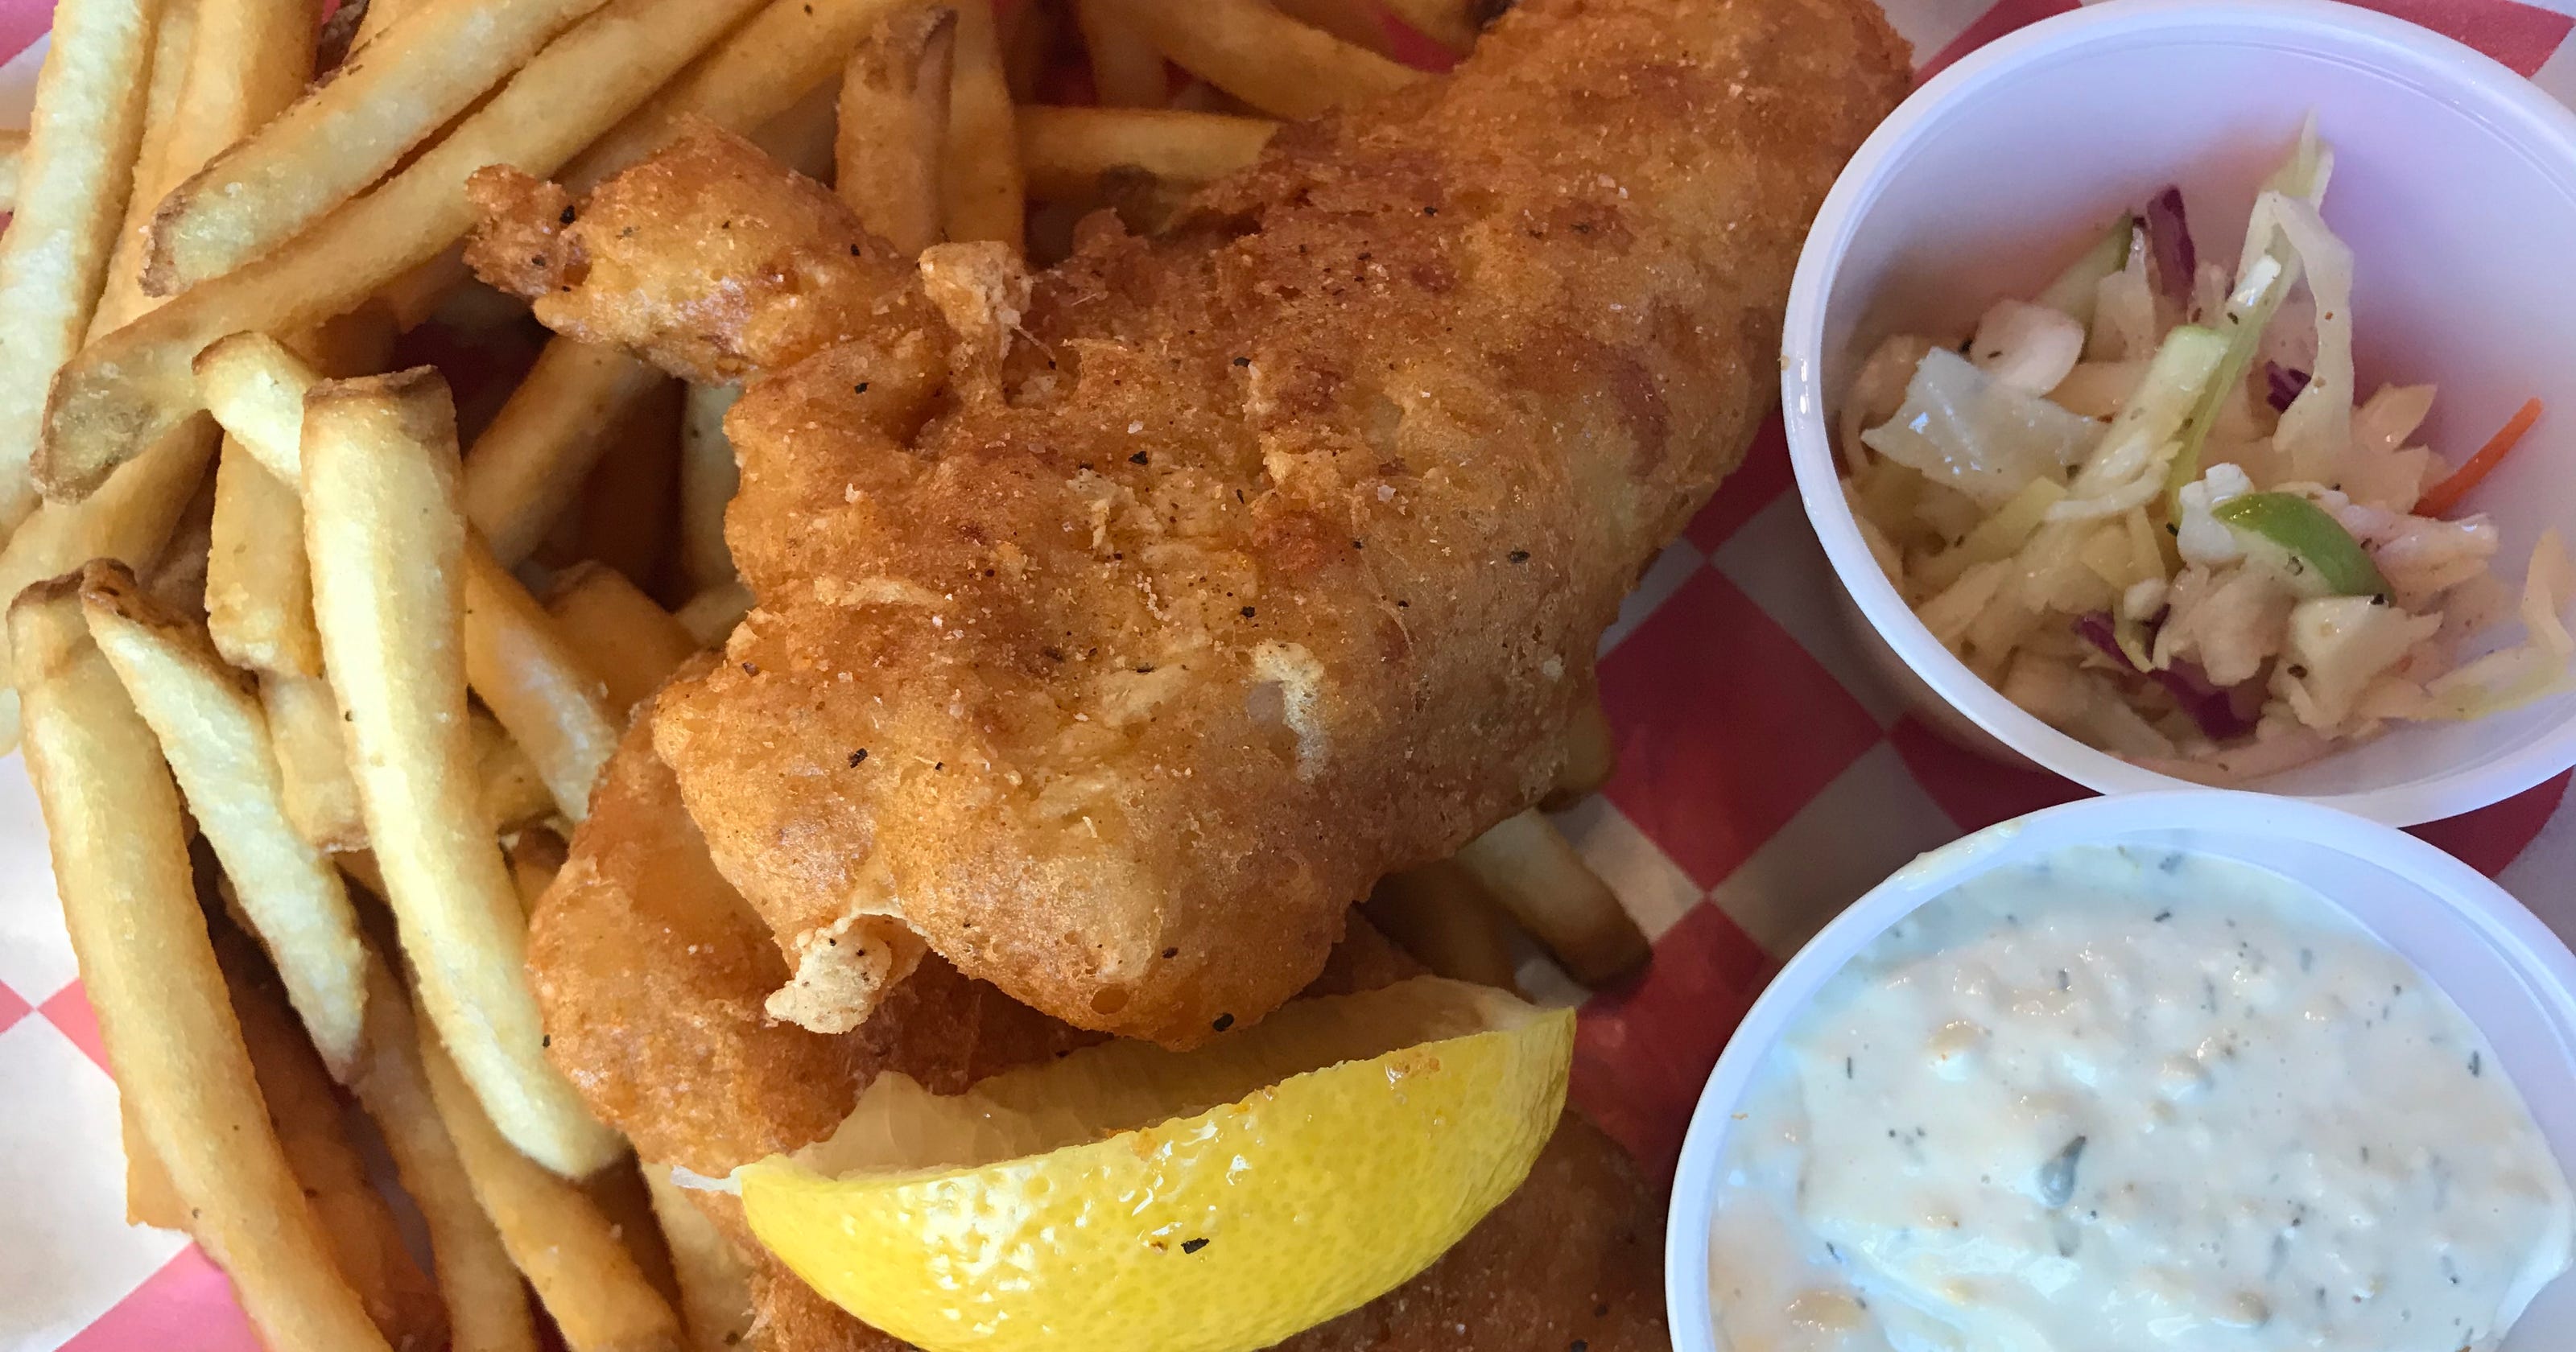 Milwaukee fish fry takeout Where to find it during coronavirus